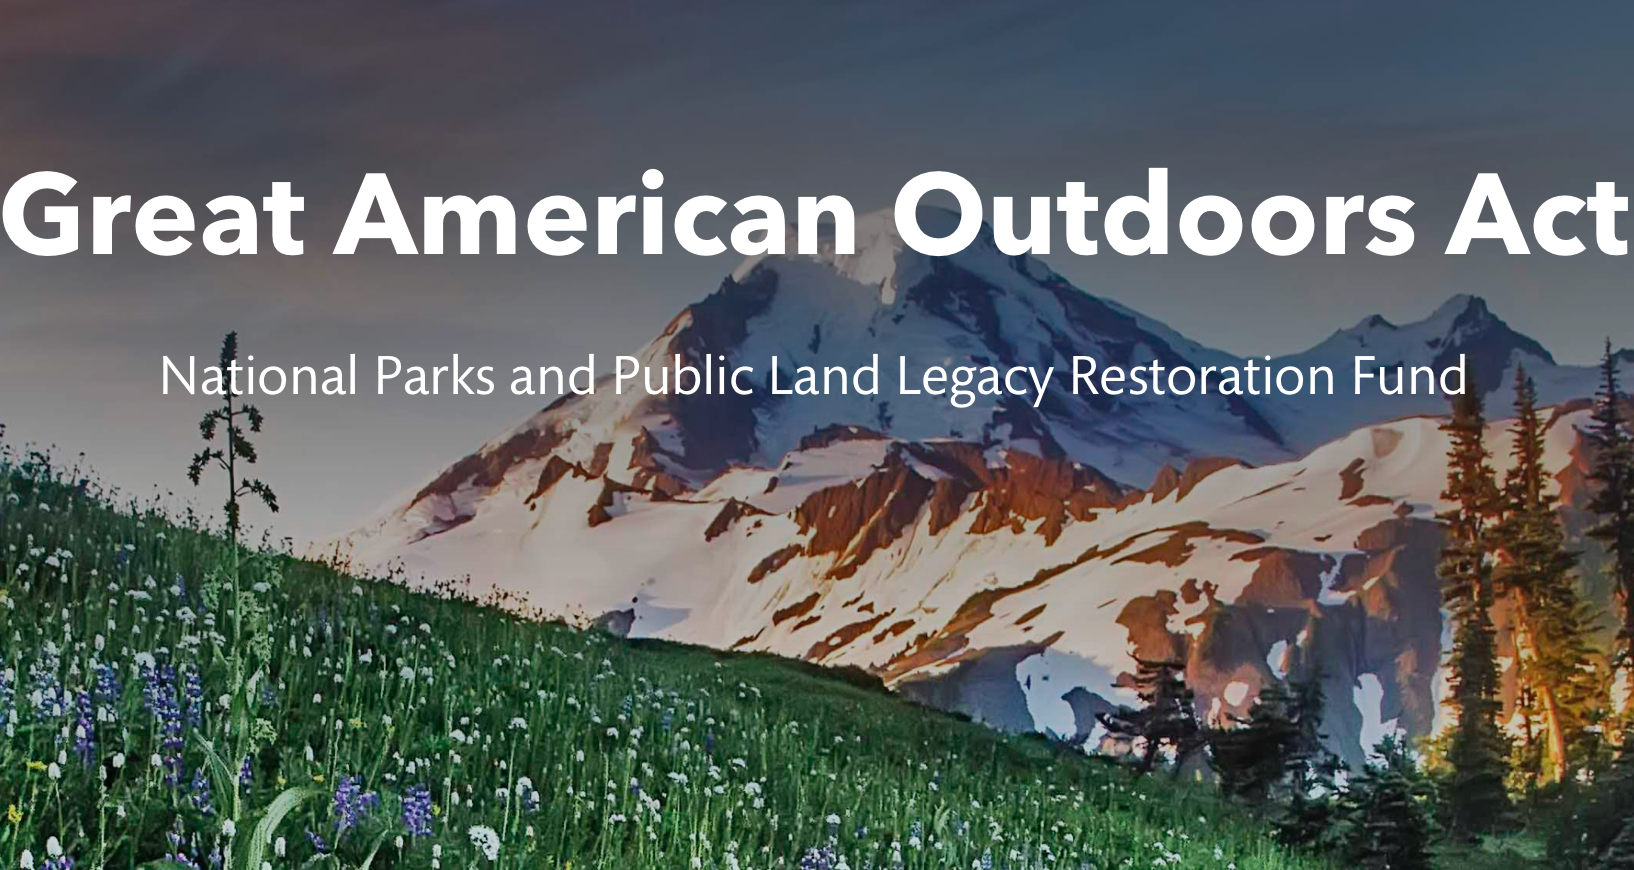 Great American Outdoors Act authorizes funding for outdoor recreation projects